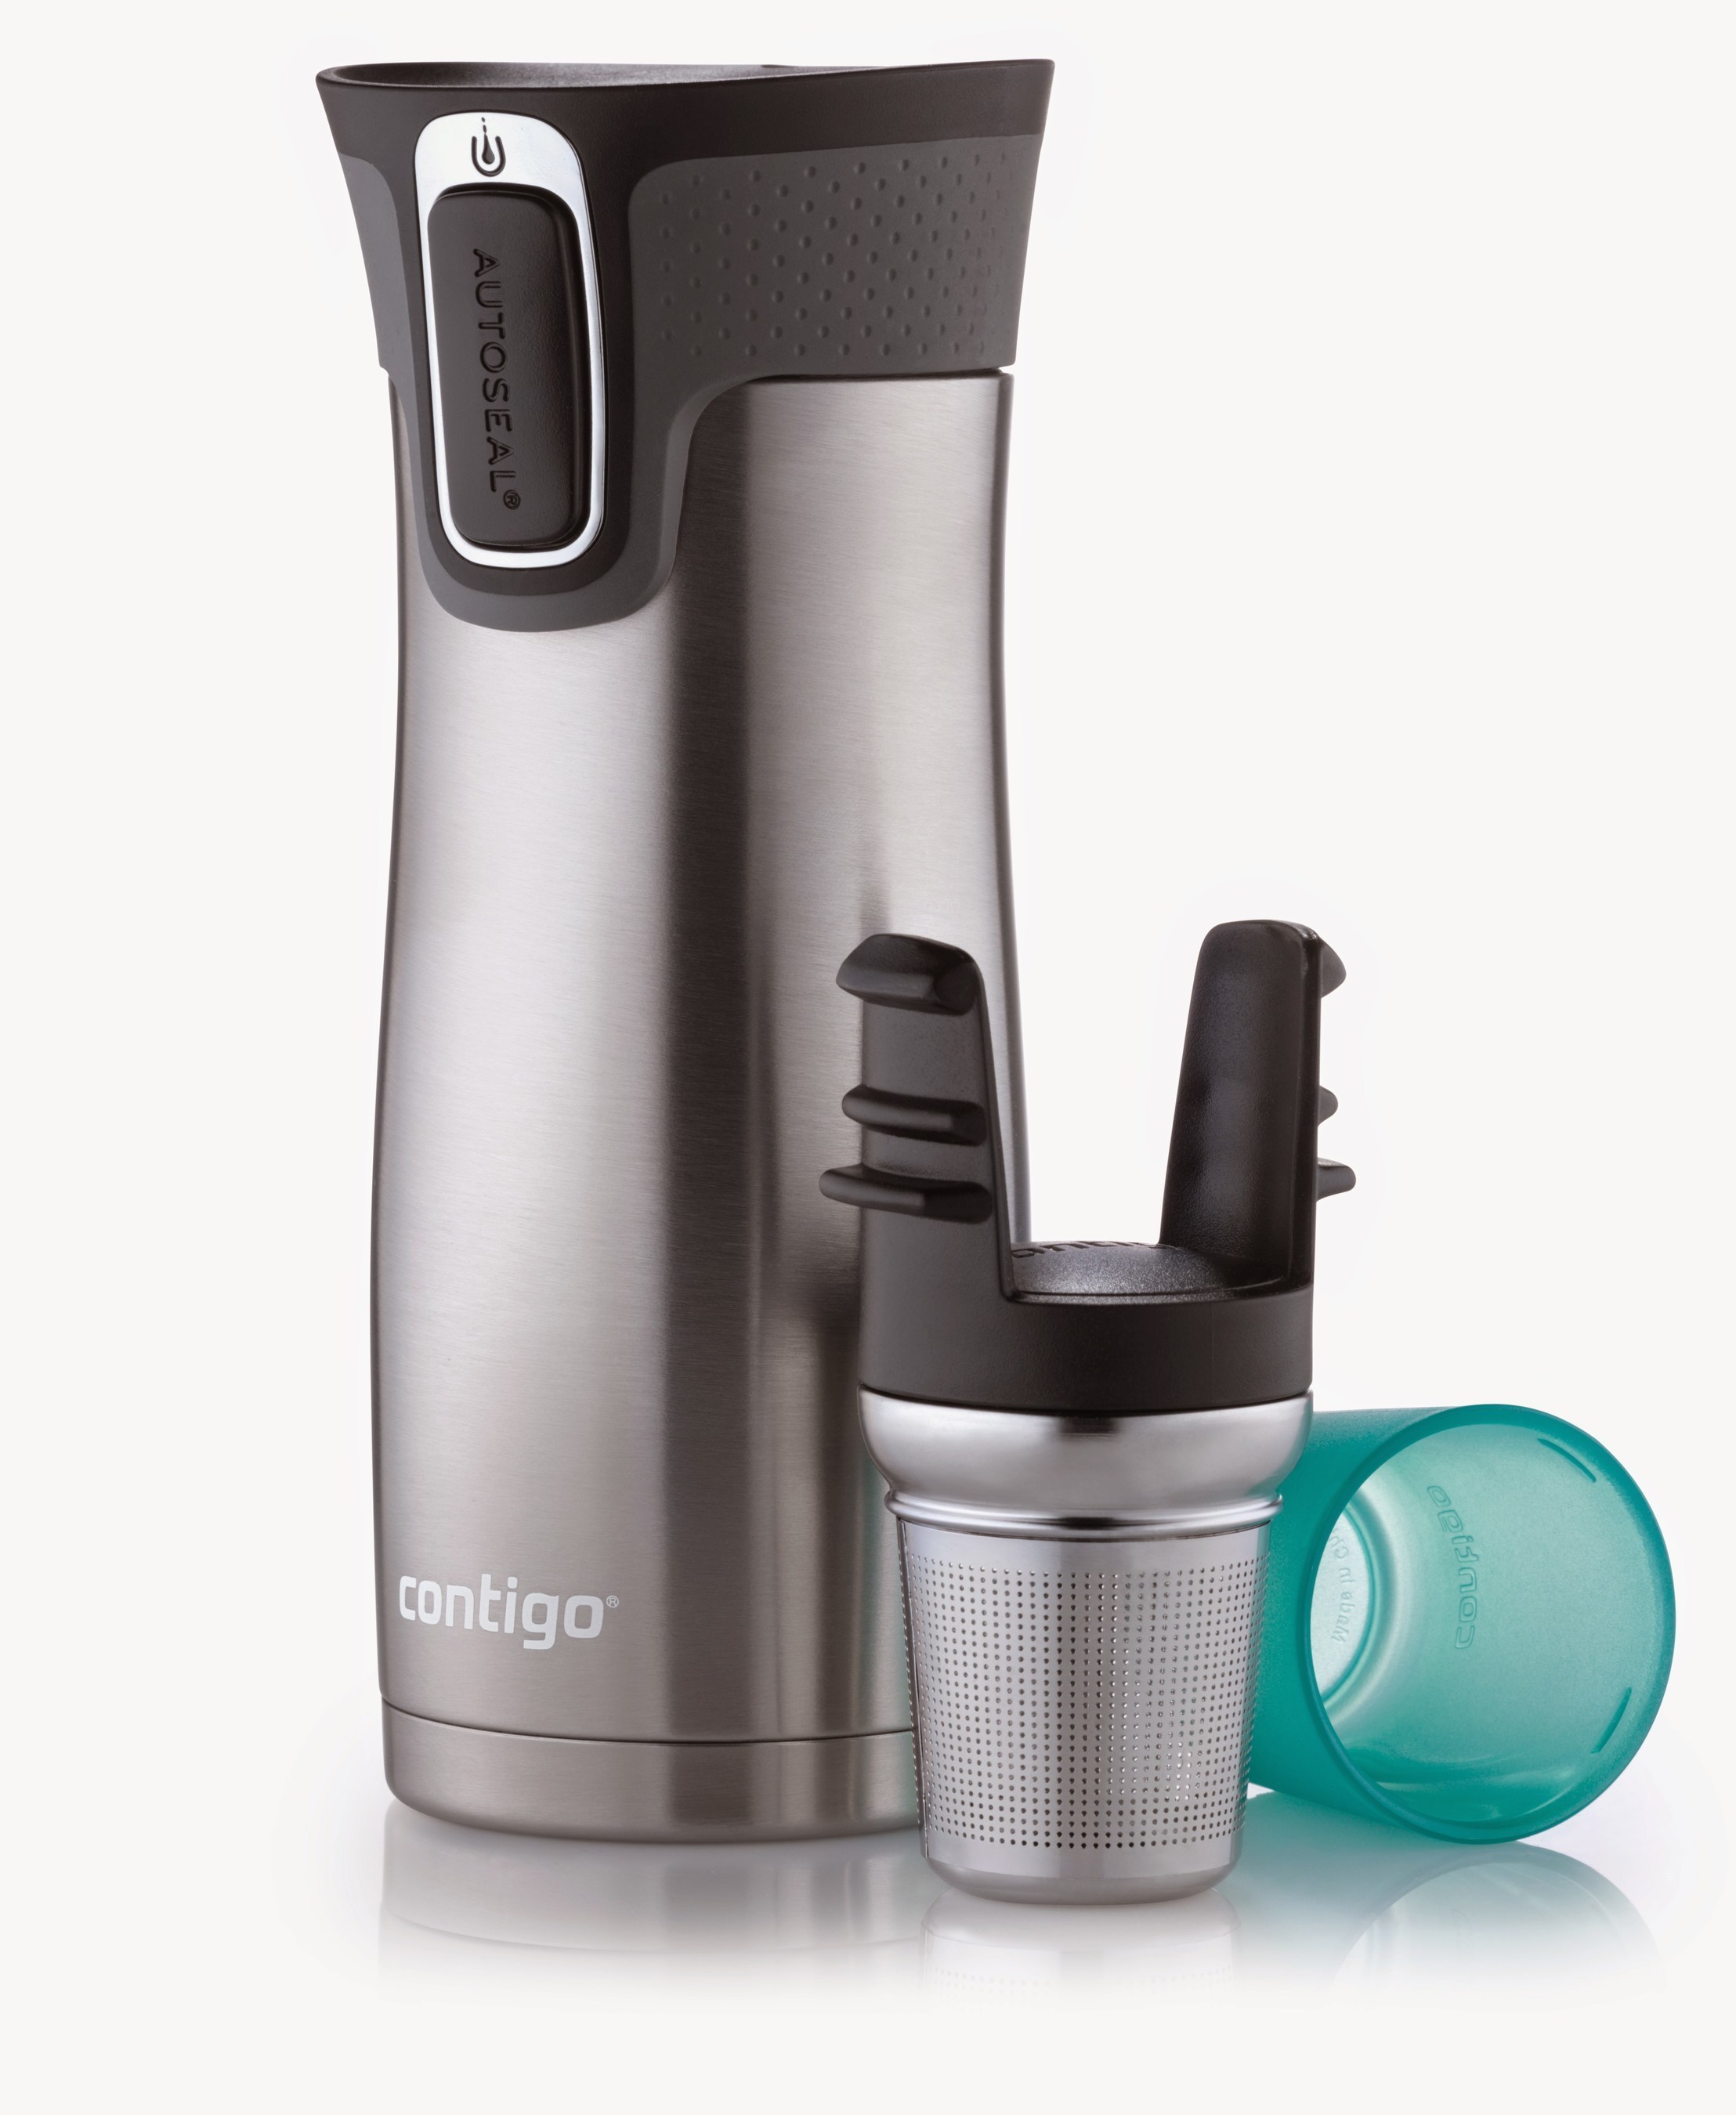 New Contigo(R) West Loop Stainless Steel Tea Infuser makes it easy to brew tea on-the-go